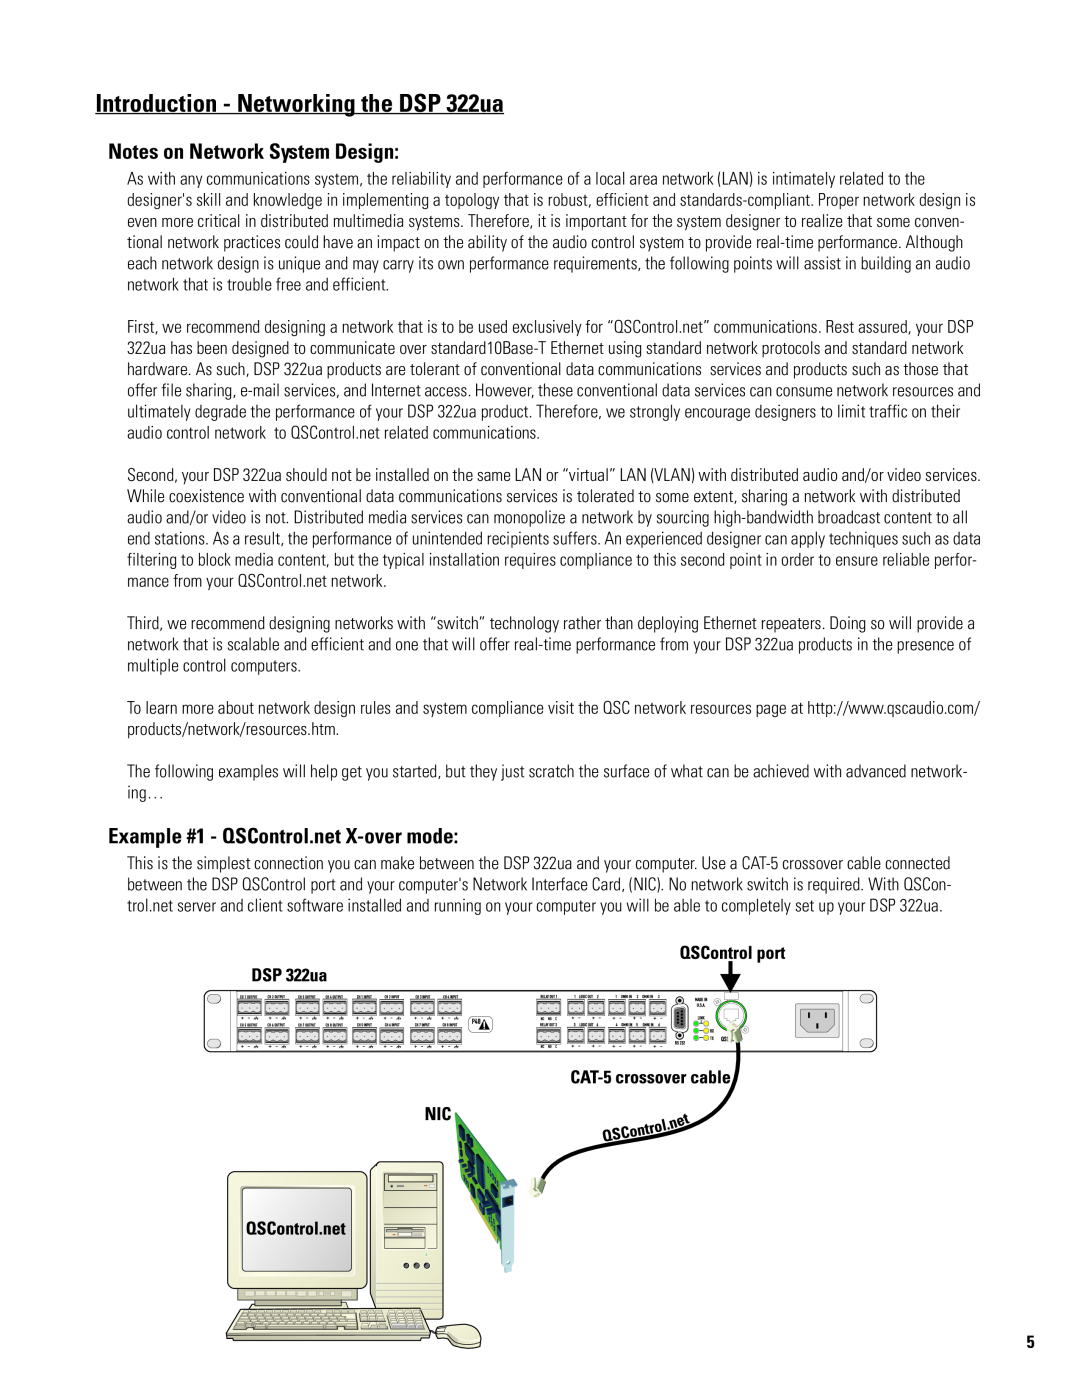 QSC Audio DSP 322UA manual Introduction - Networking the DSP 322ua, Notes on Network System Design 